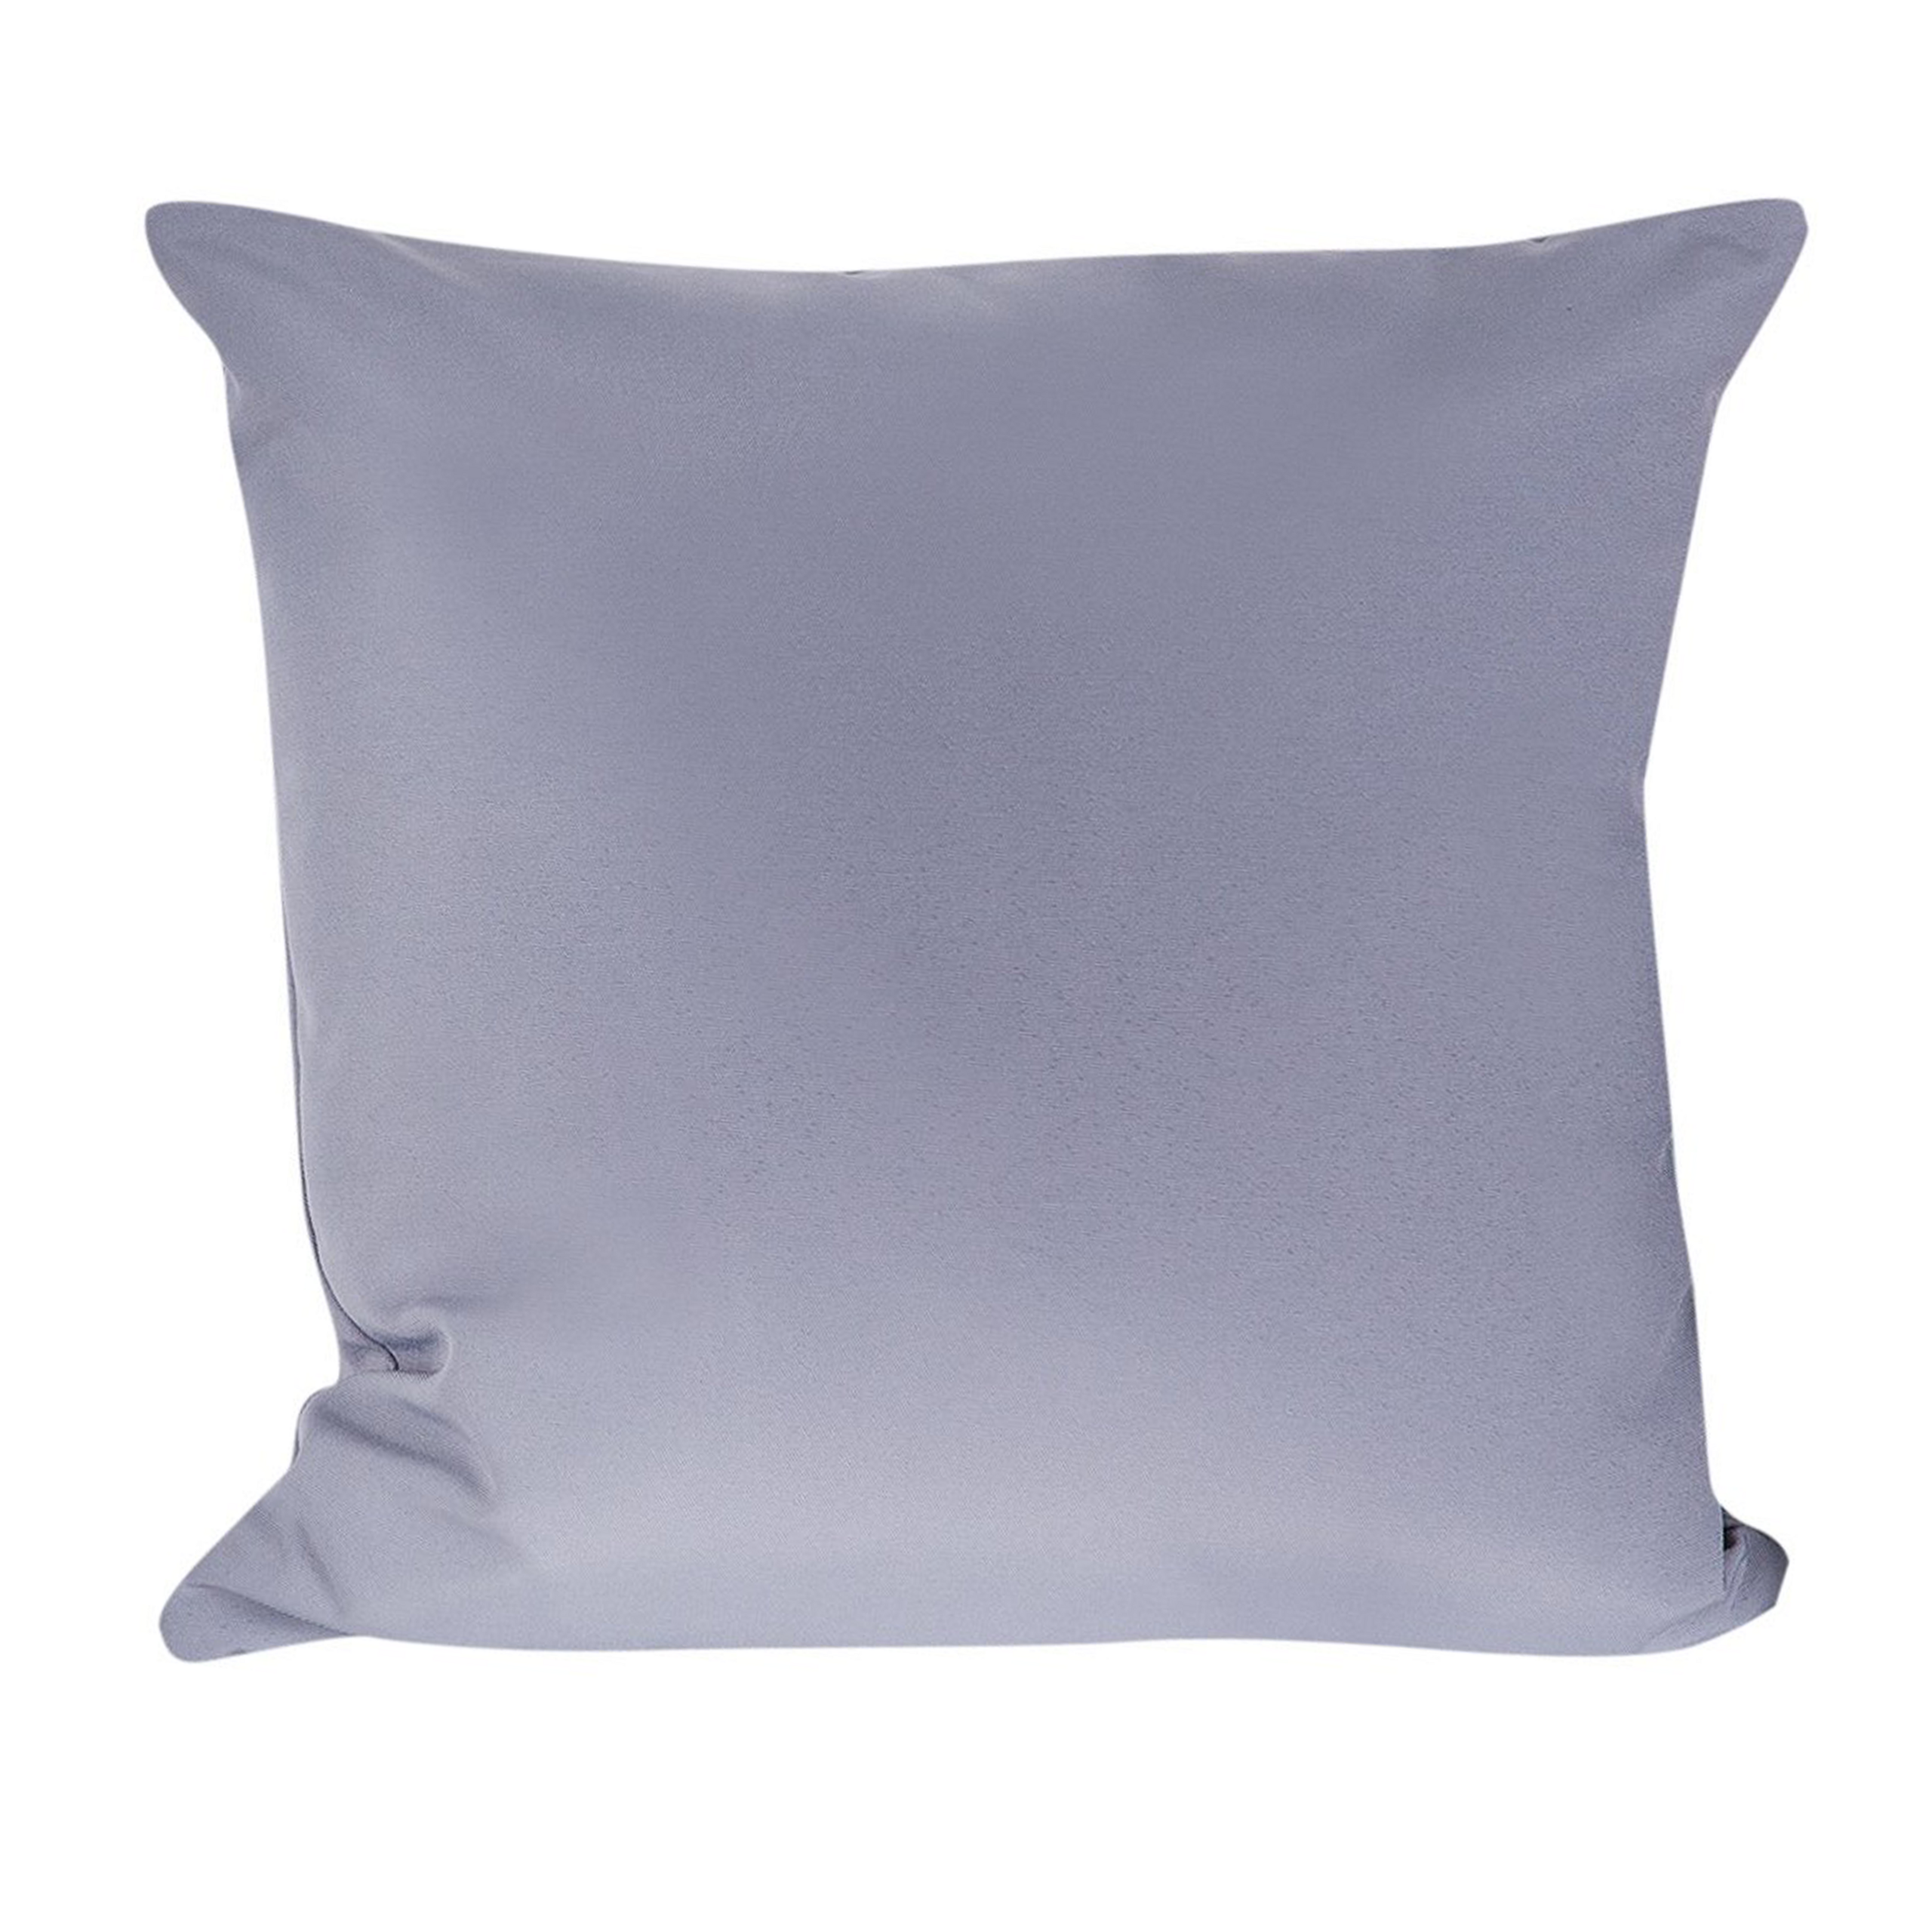 Beliani Outdoor Garden Cushion Grey 50 x 50 cm Water Resistant Square Removable Cover